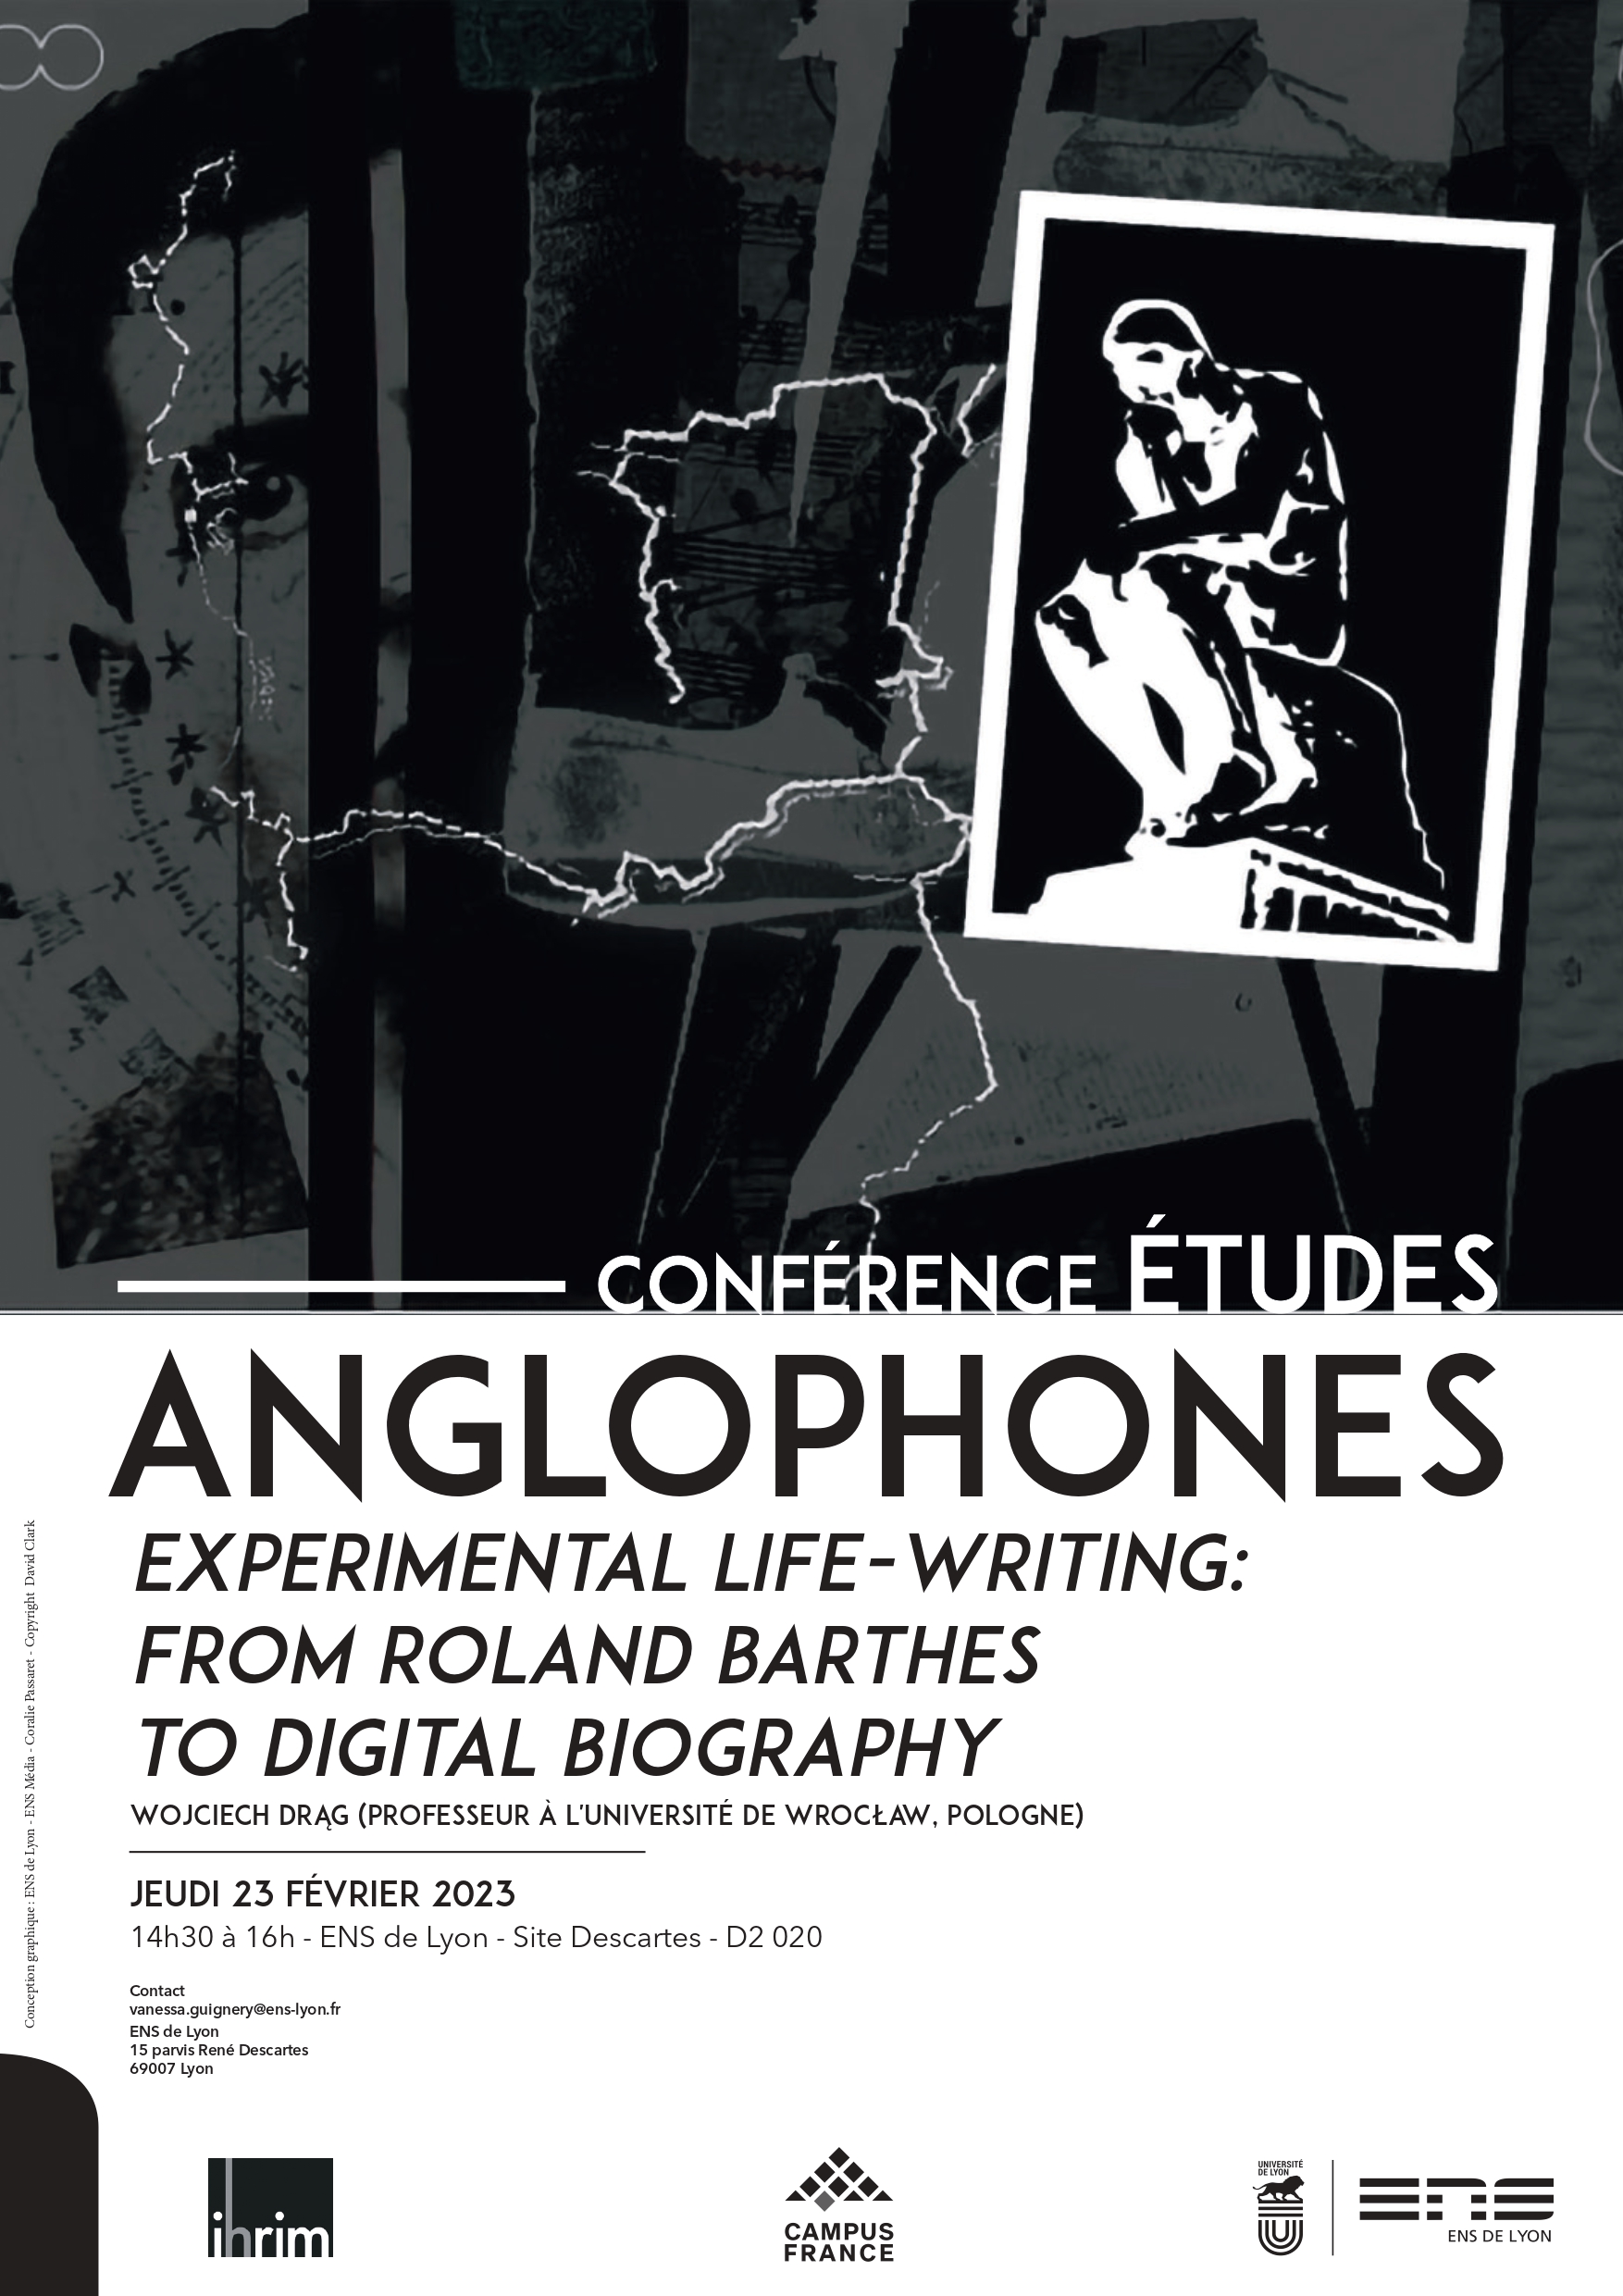 Conférence : Wojciech Drag - Experimental Life-Writing: From Roland Barthes to Digital Biography